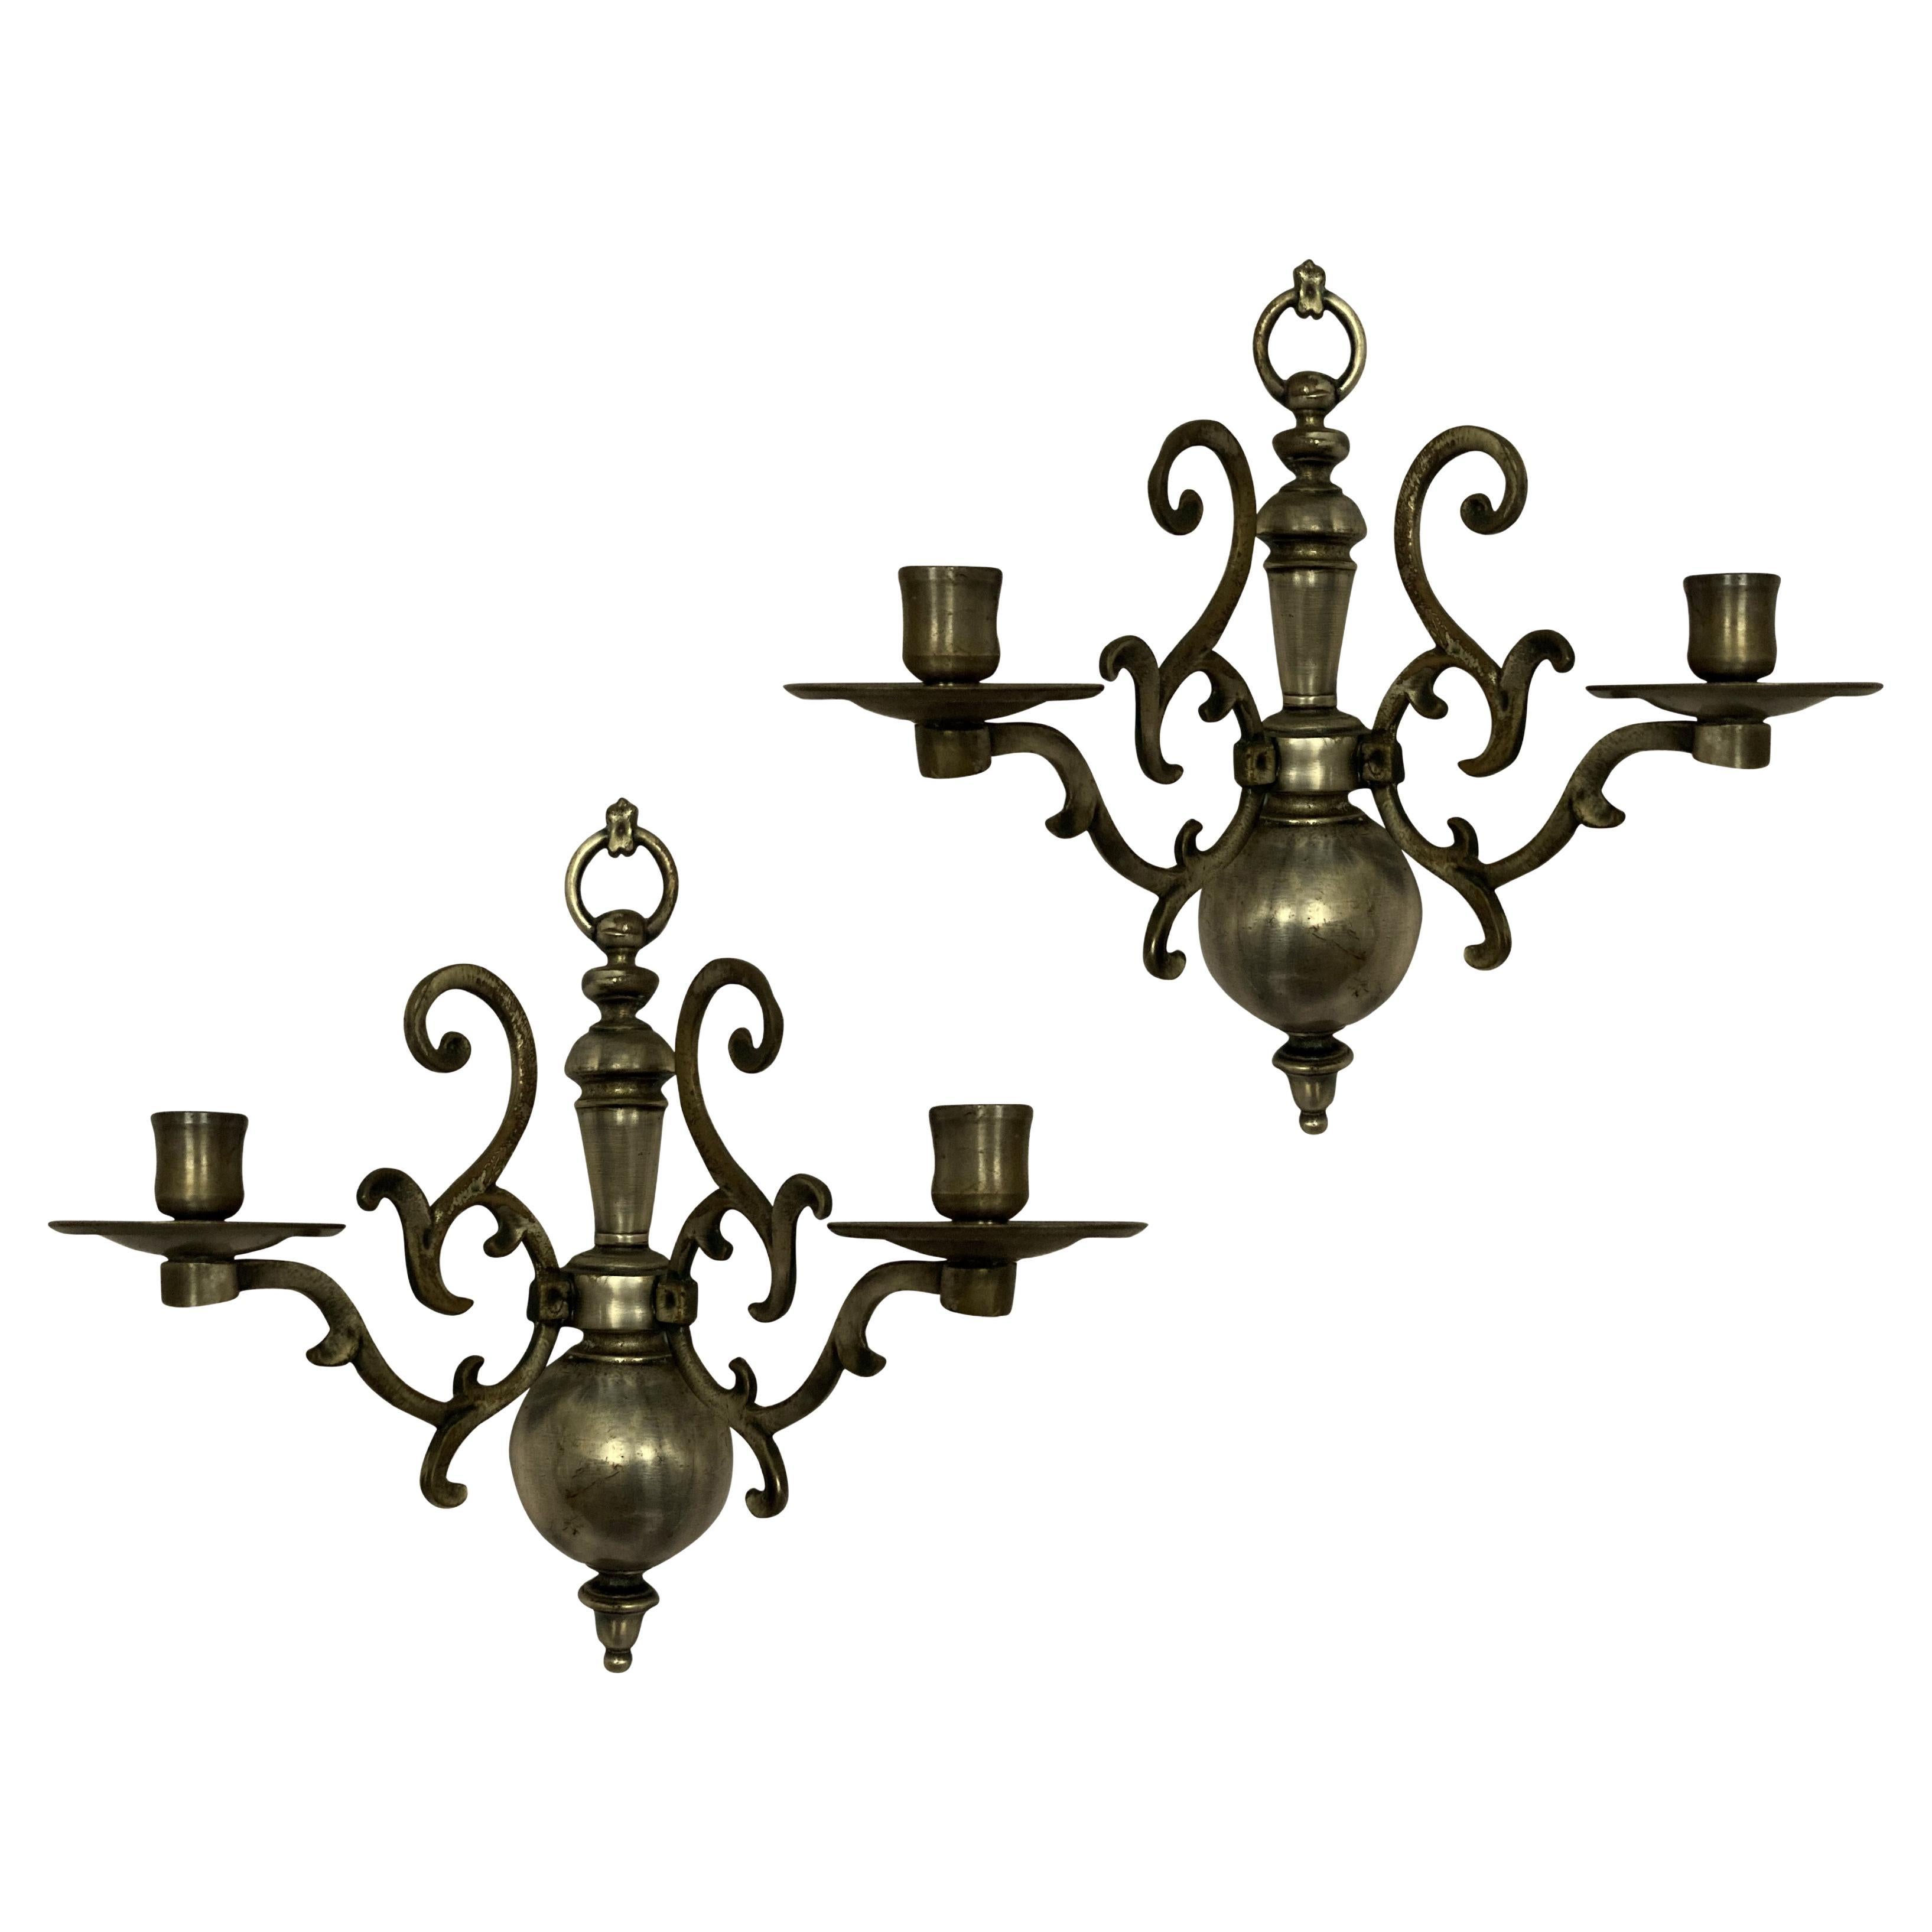 Pair of Flemish Silver Plated Wall Sconces